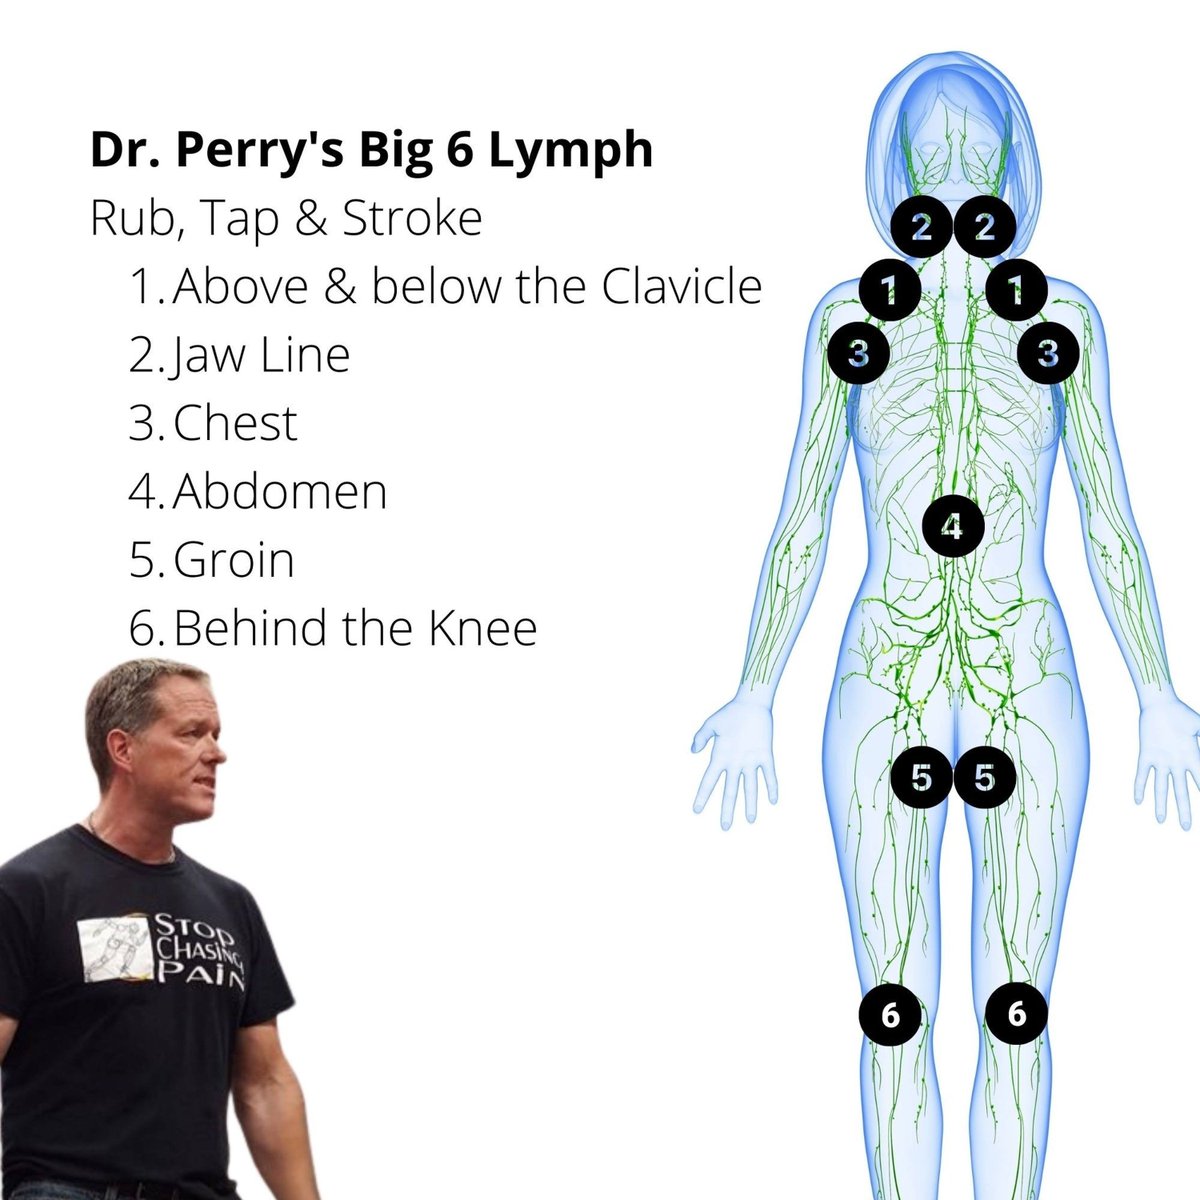 I love the Big 6 Lymph method by @stopchasingpain prior to sauna personally. Truly one should take a couple of minutes every AM for this protocol. Lymph needs movement, and 8h+ of stagnation during the night can def make one feel sluggish/low energy in the AM if lymphatic